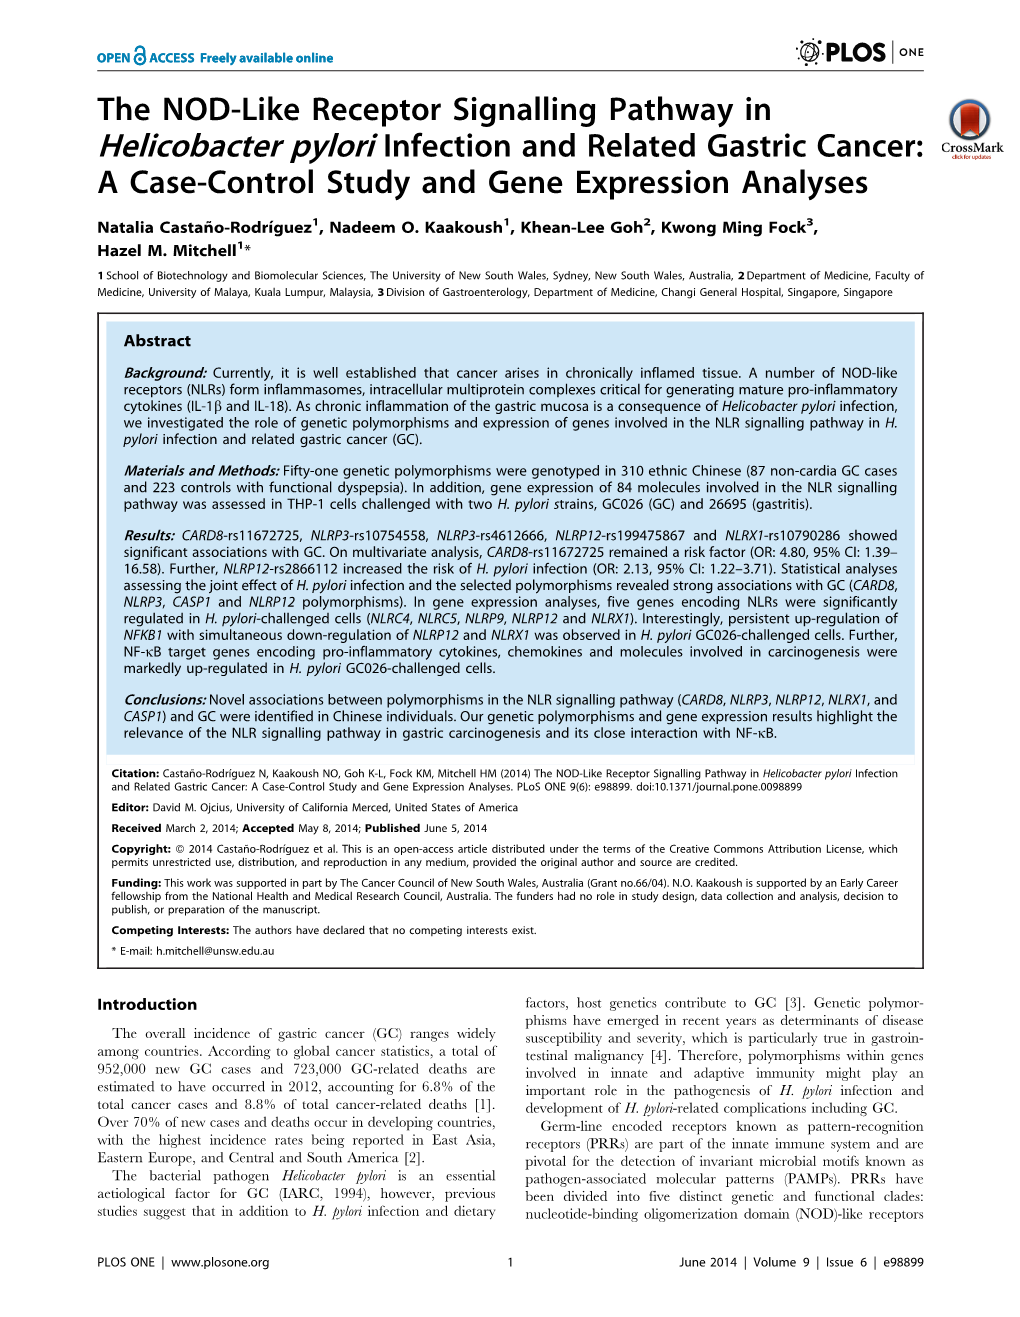 Helicobacter Pylori Infection and Related Gastric Cancer: a Case-Control Study and Gene Expression Analyses